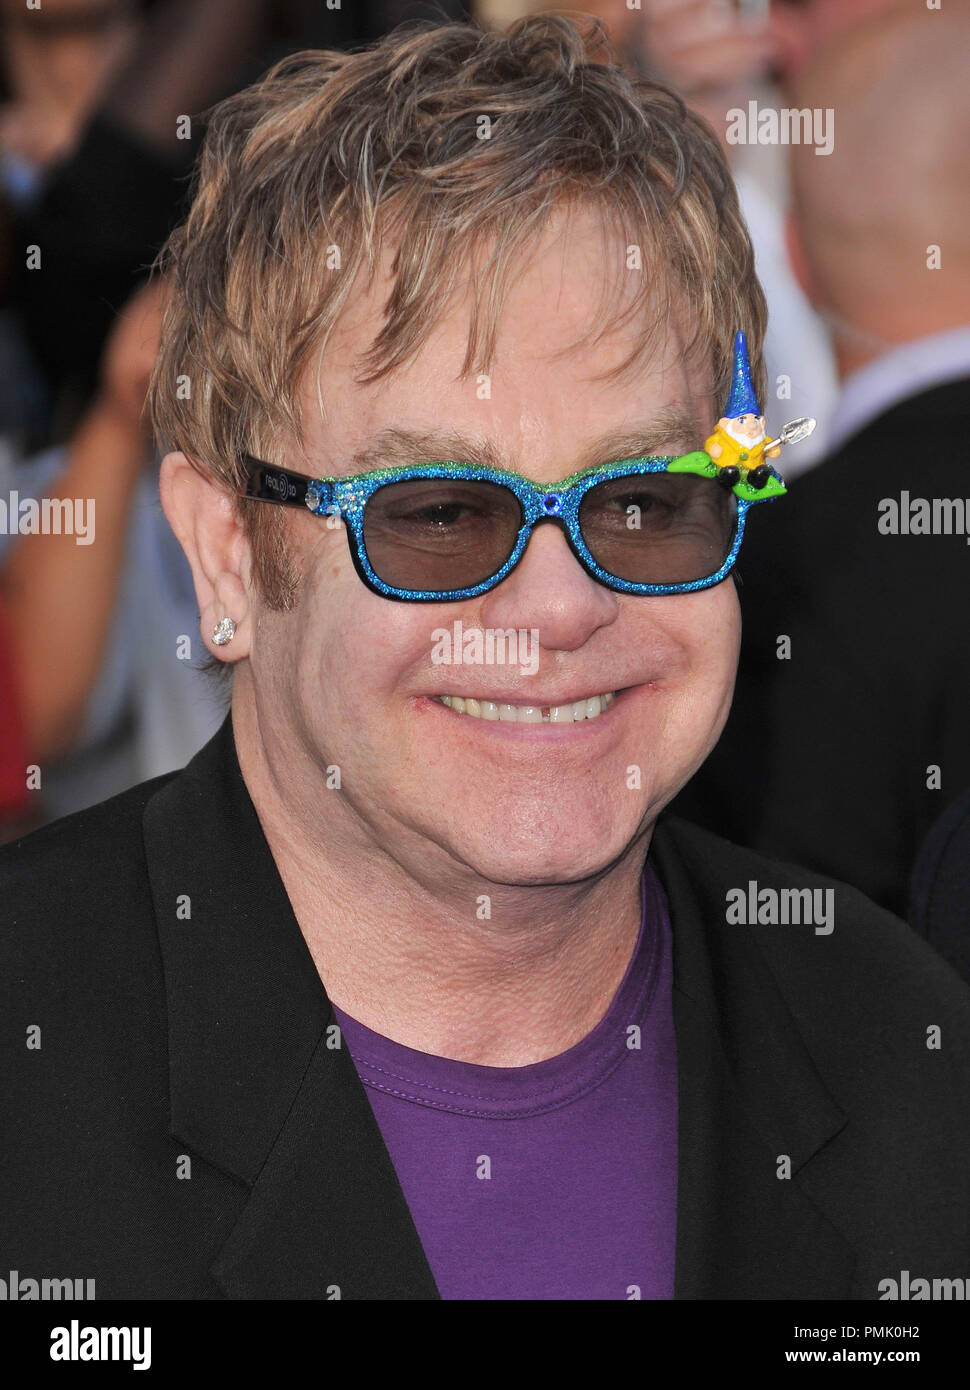 Elton John at the World Premiere of 'Gnomeo & Juliet' held at the El Capitan Theatre in Hollywood, CA. The event took place on Sunday, January 23, 2011. Photo by PRPP Pacific Rim Photo Press/ PictureLux Stock Photo